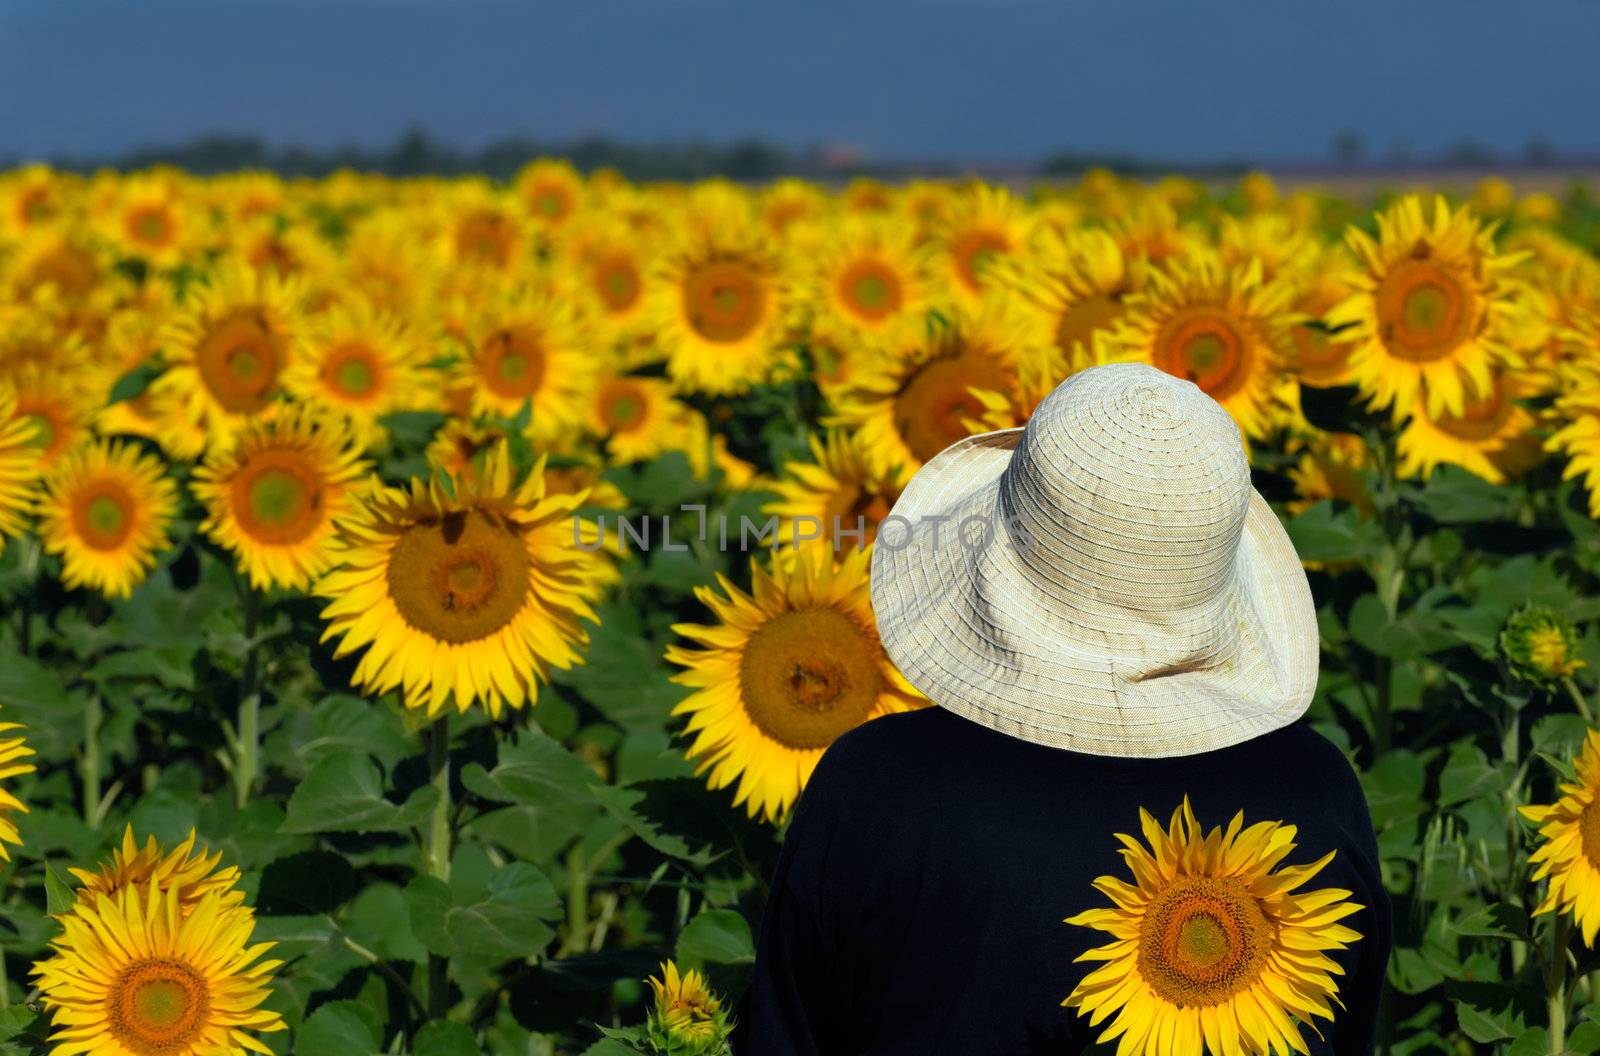 Looking at sunflowers by akarelias